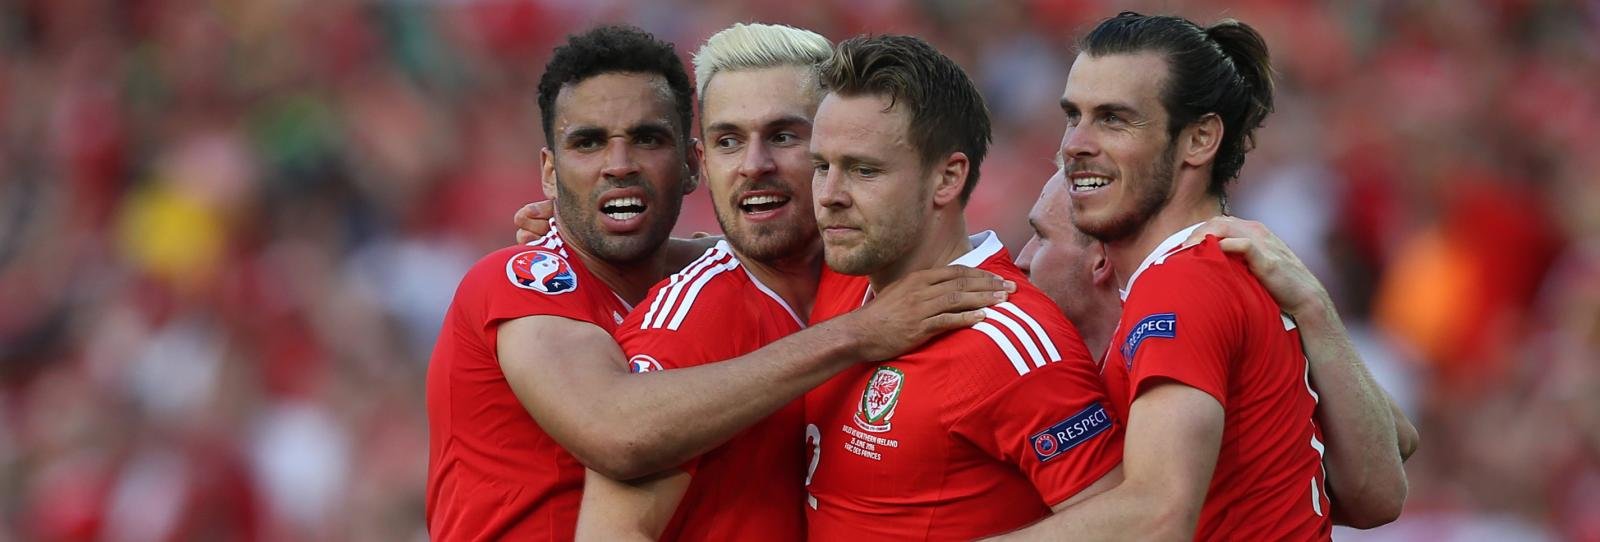 Wales 1-0 Northern Ireland: EURO 2016 Round of 16 Report